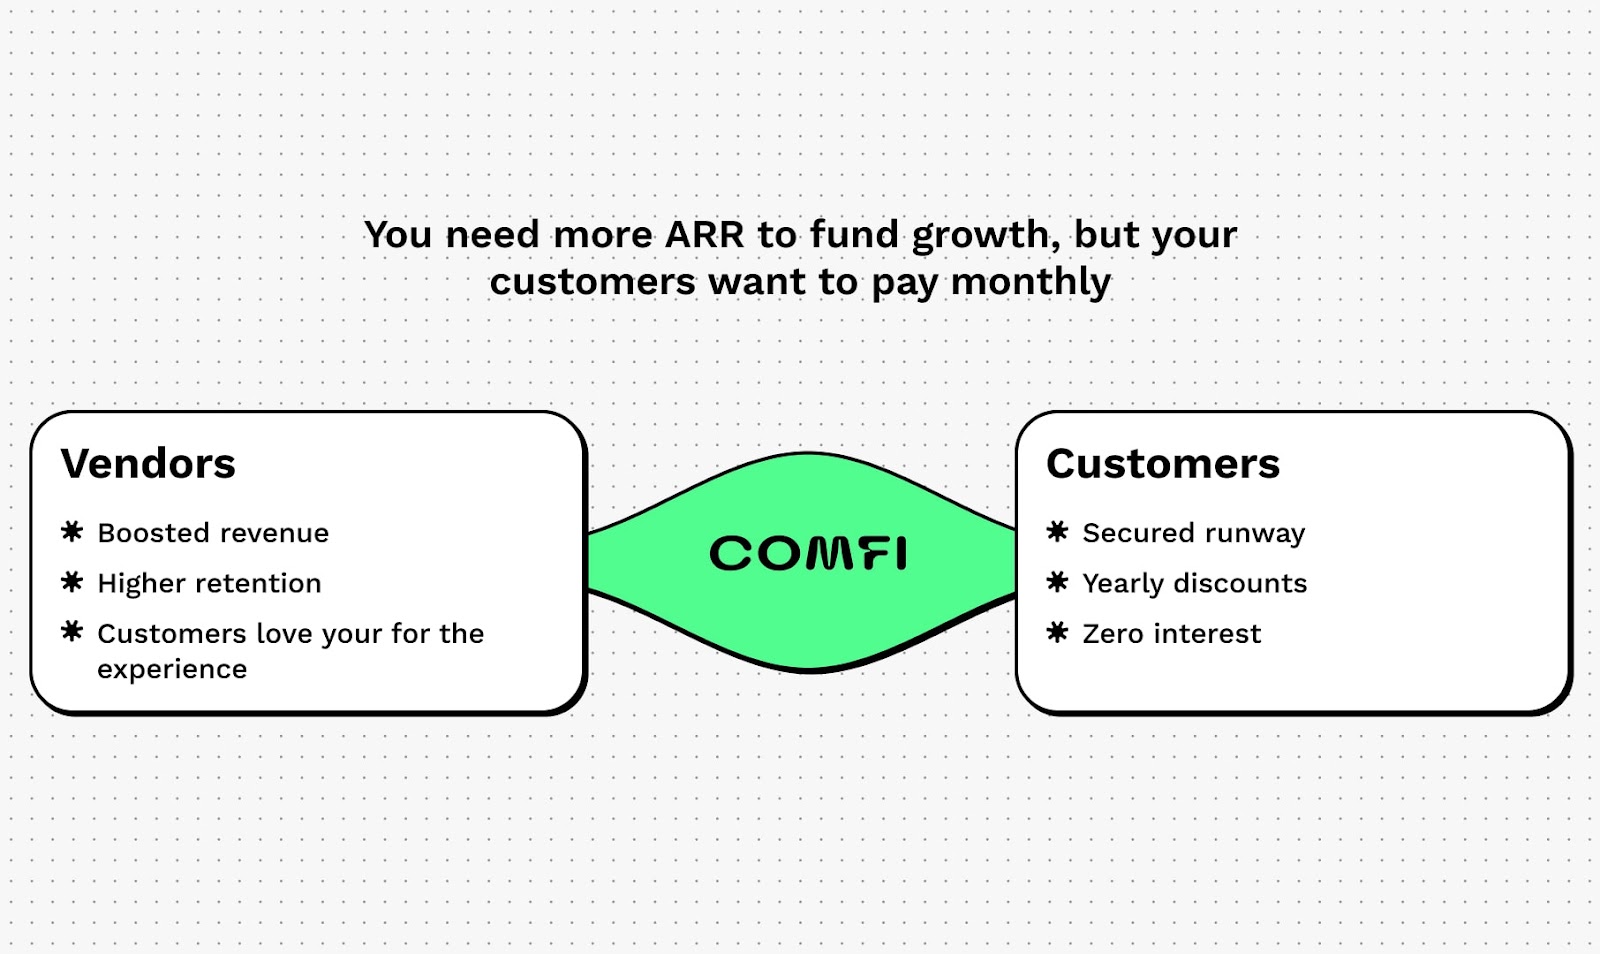 Infographics of Comfi billing benefits:
You need more ARR to fund growth, but your customers want to pay monthly.
Comfi for vendors:
Boosted revenue
Higher retention
Customers love you for experience
Comfi for customers:
Secured runway
Yearly discounts
Zero interest